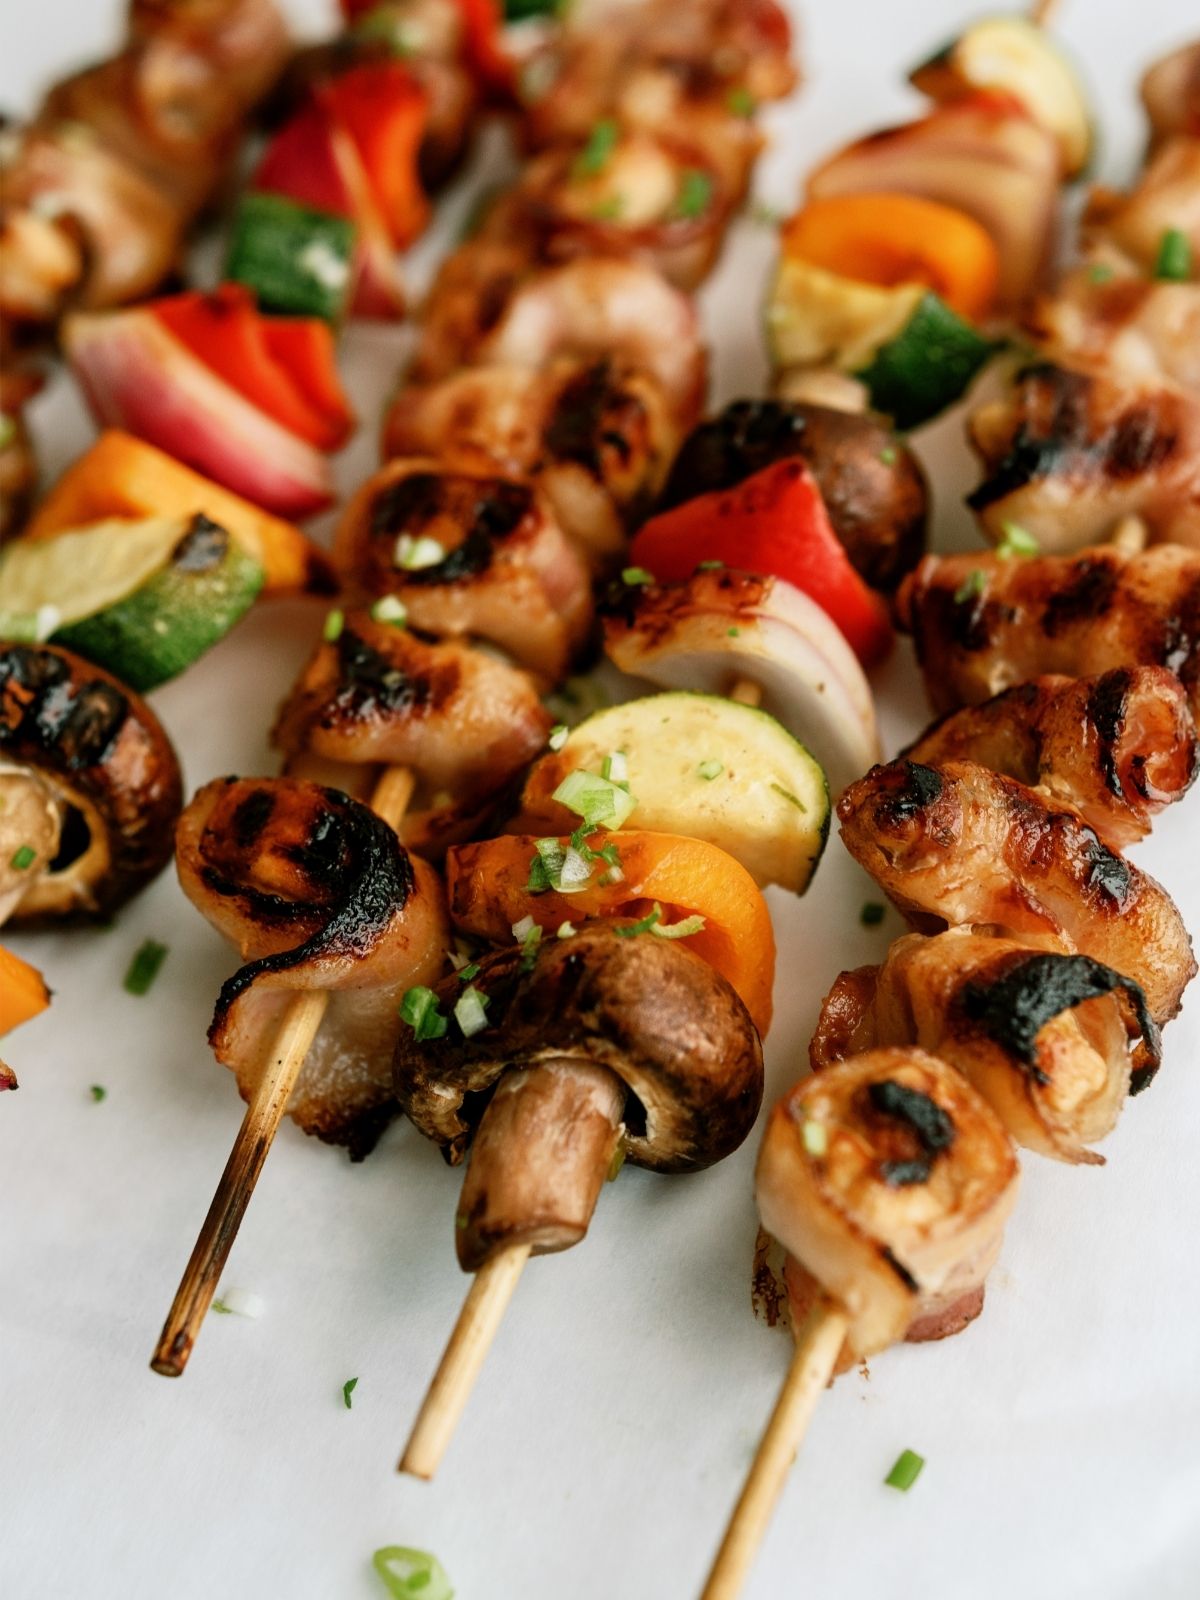 Chicken and Bacon Shish Kabobs with Veggie Skewers